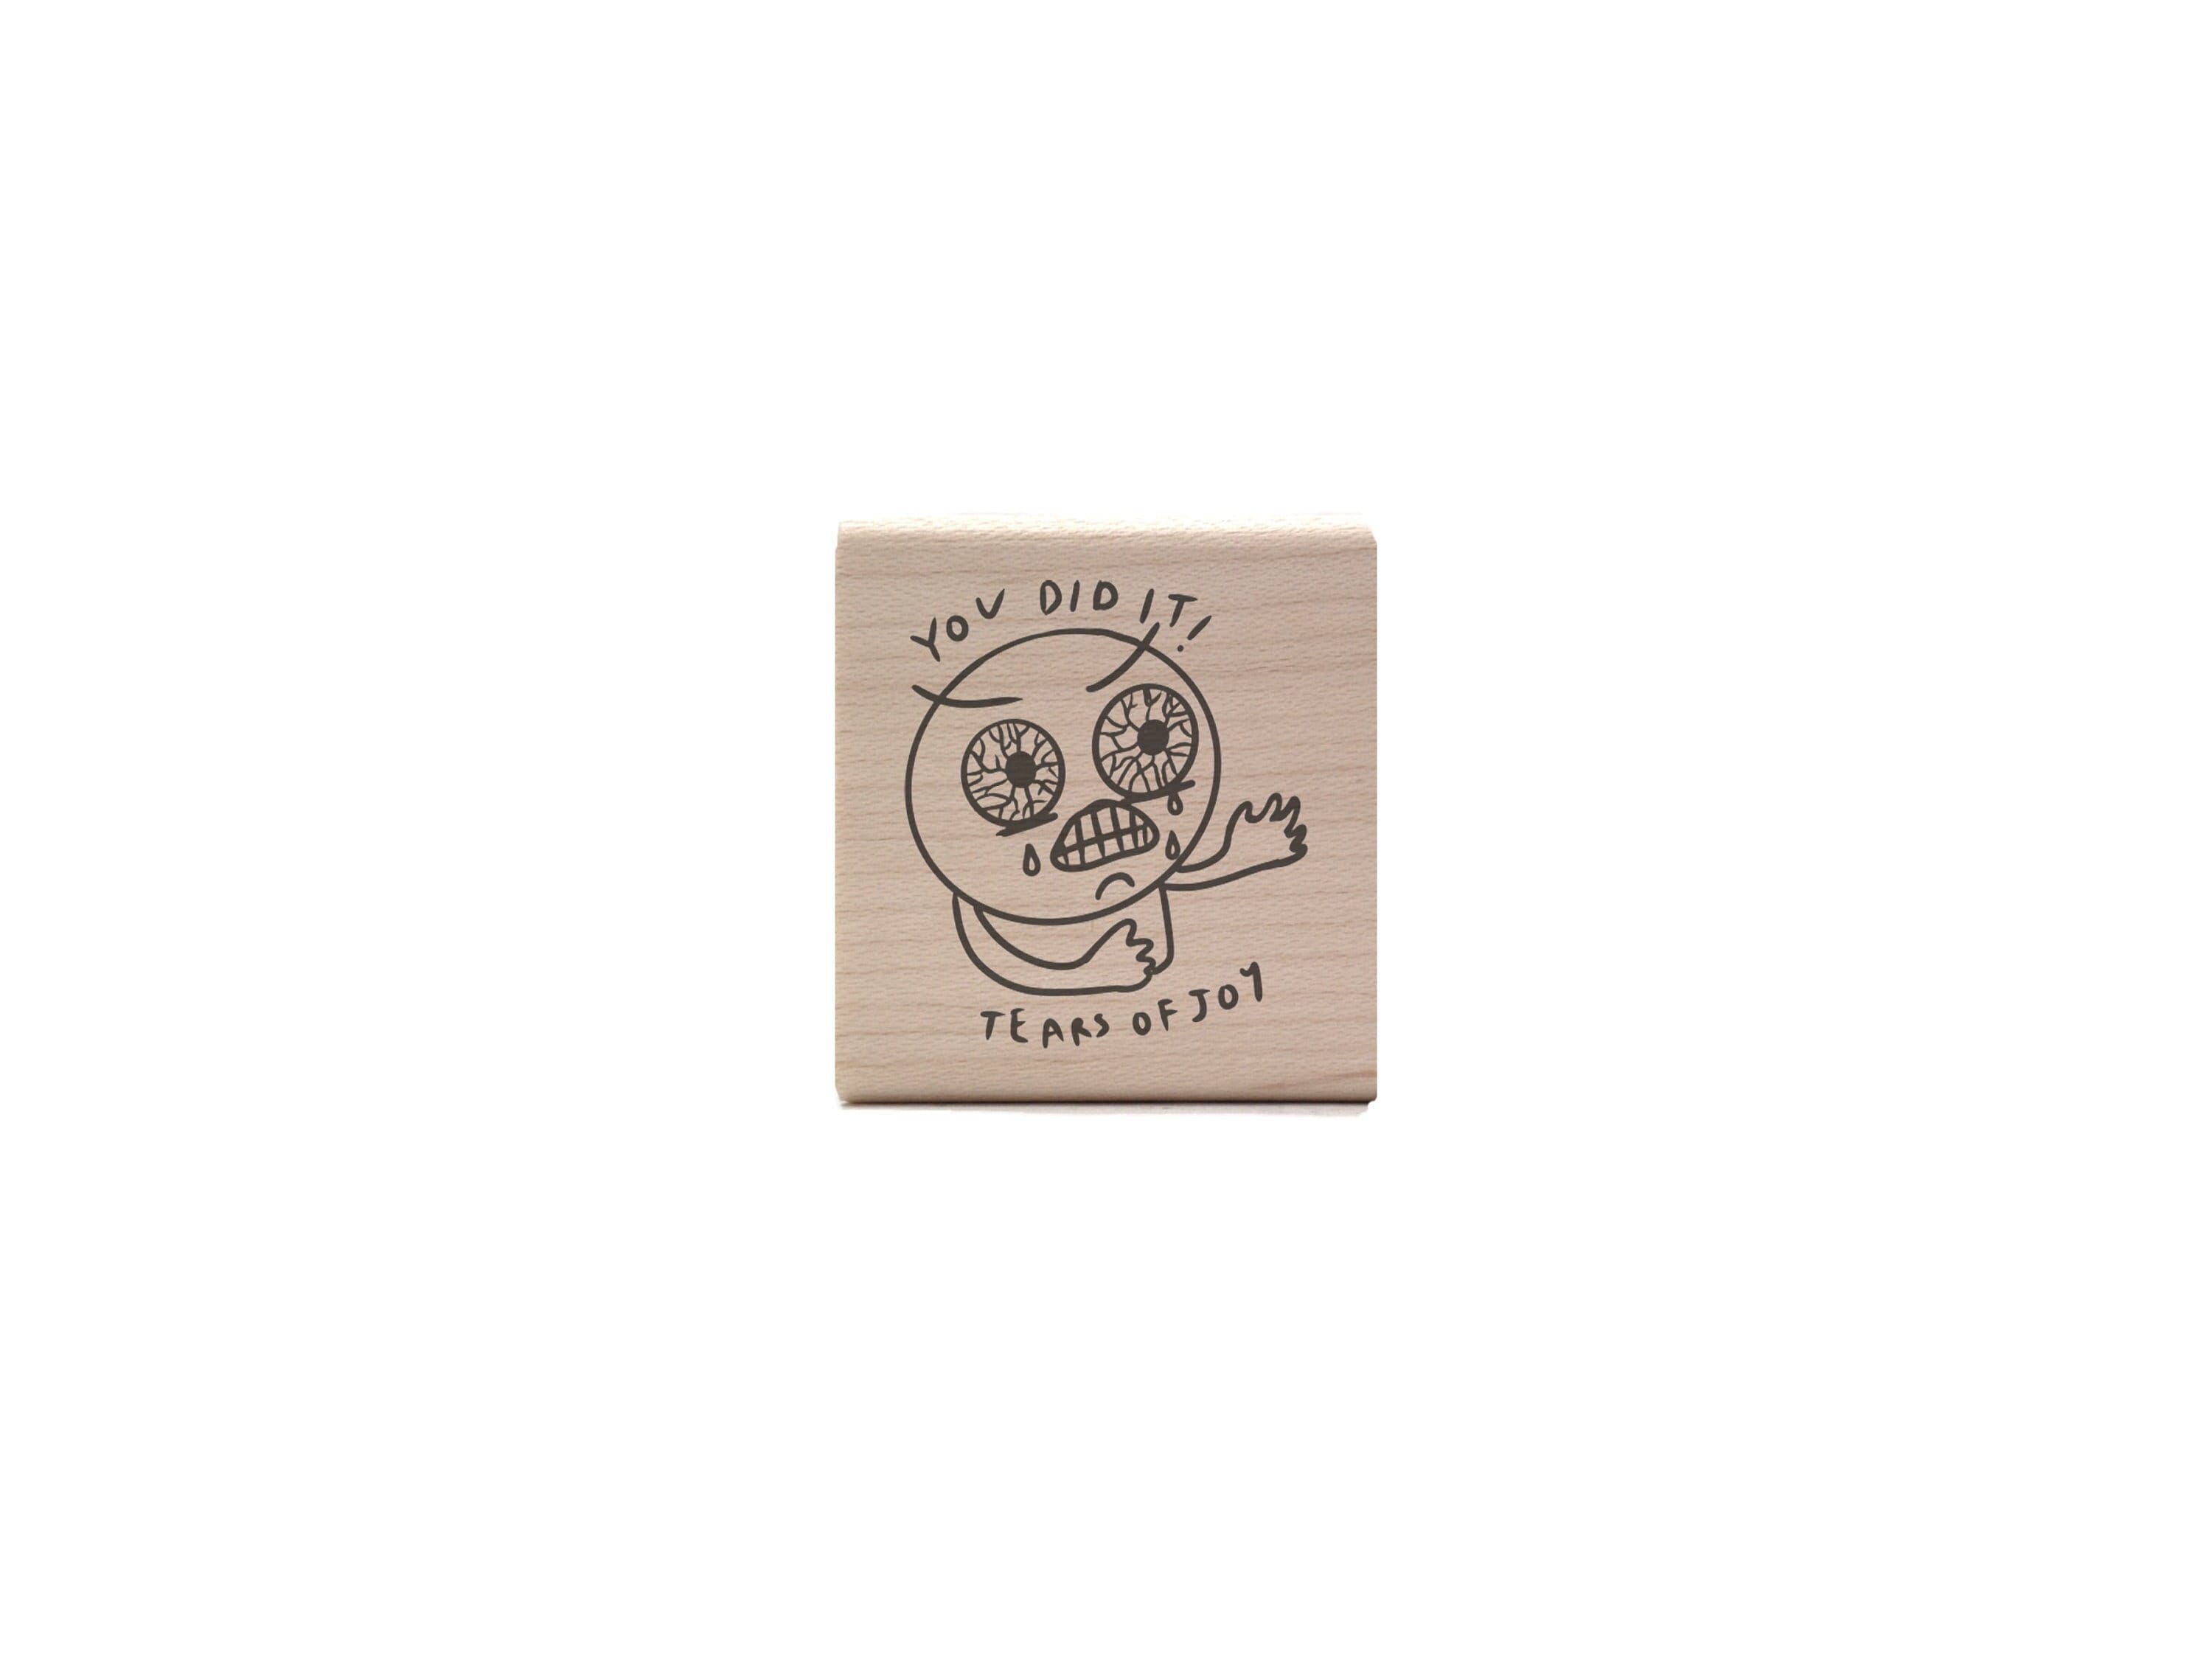 You did it! Meme Rubber Stamp - Inspirational / Motivational Grading - Angry Face Teacher Stamp